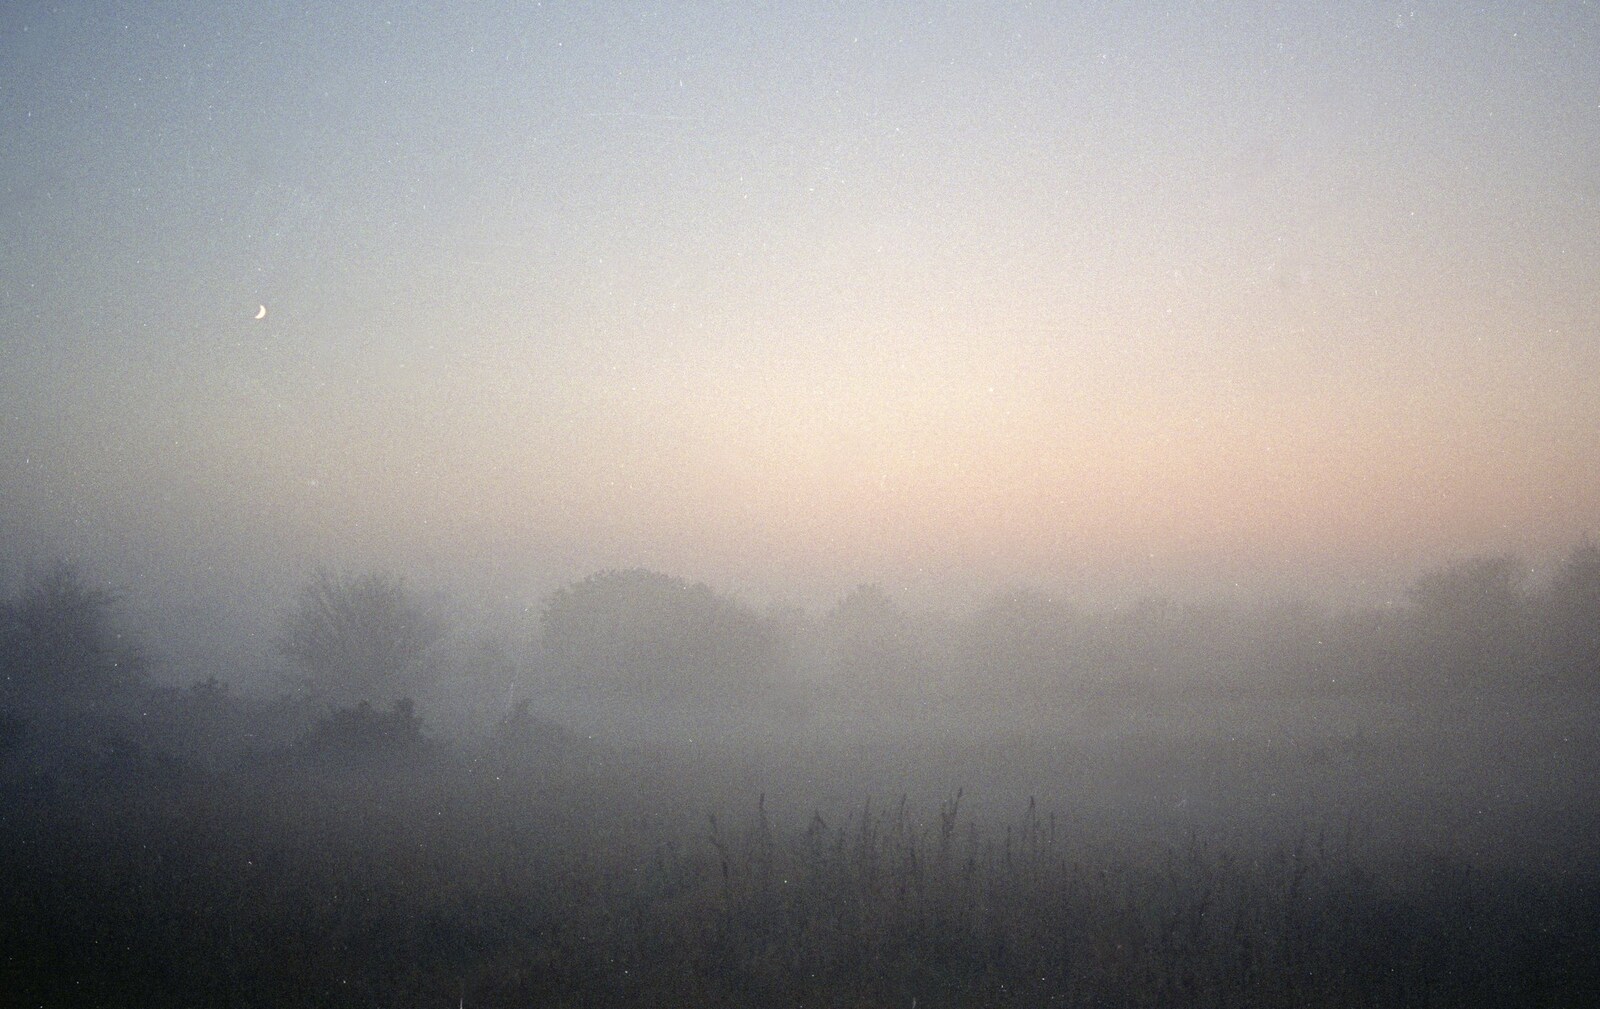 A very misty evening near the golf course from The Old Man Visits, and a Frosty Stuston, Suffolk - 8th December 1989